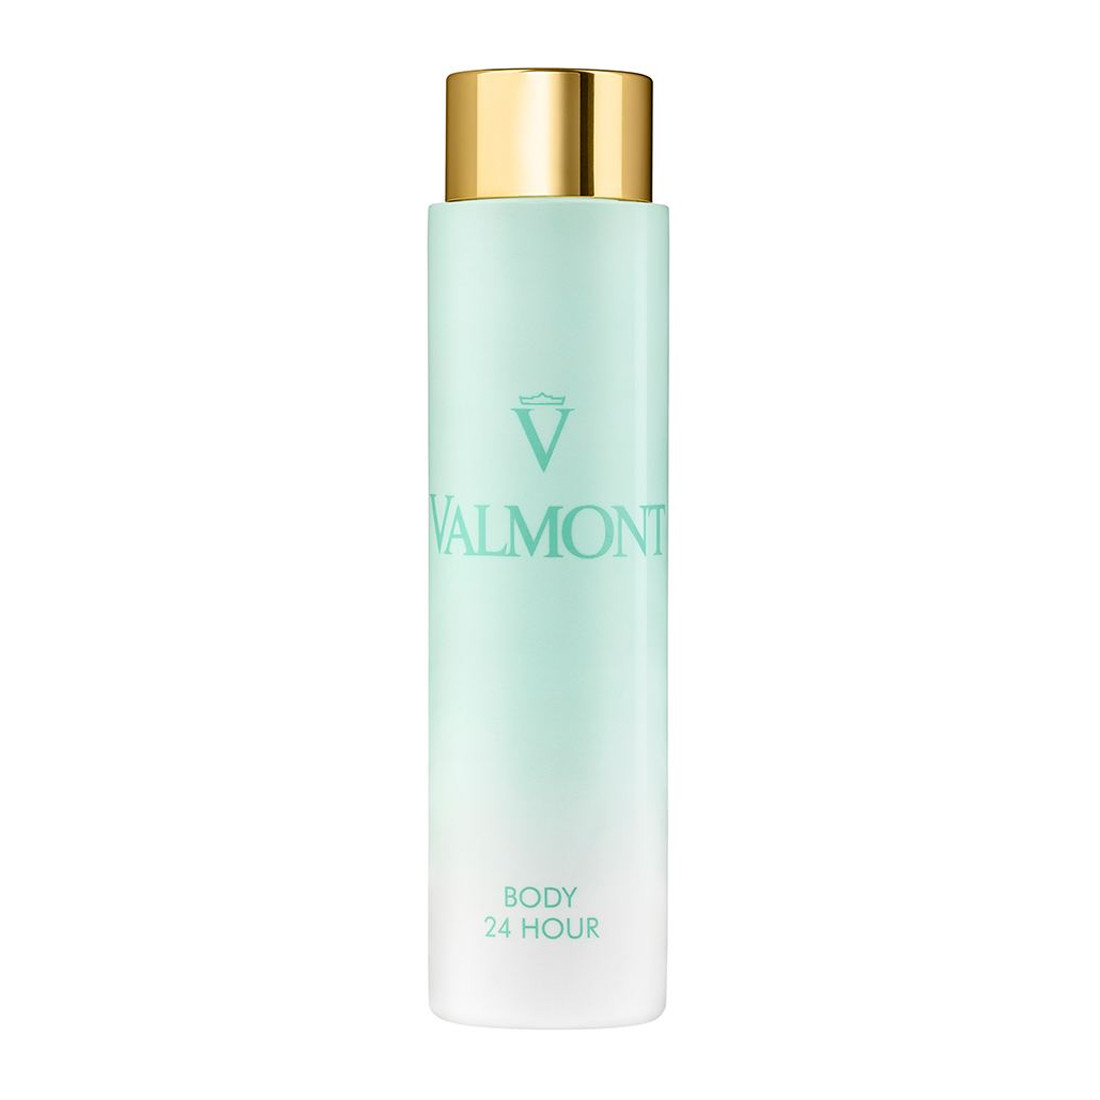 valmont body 24 hour